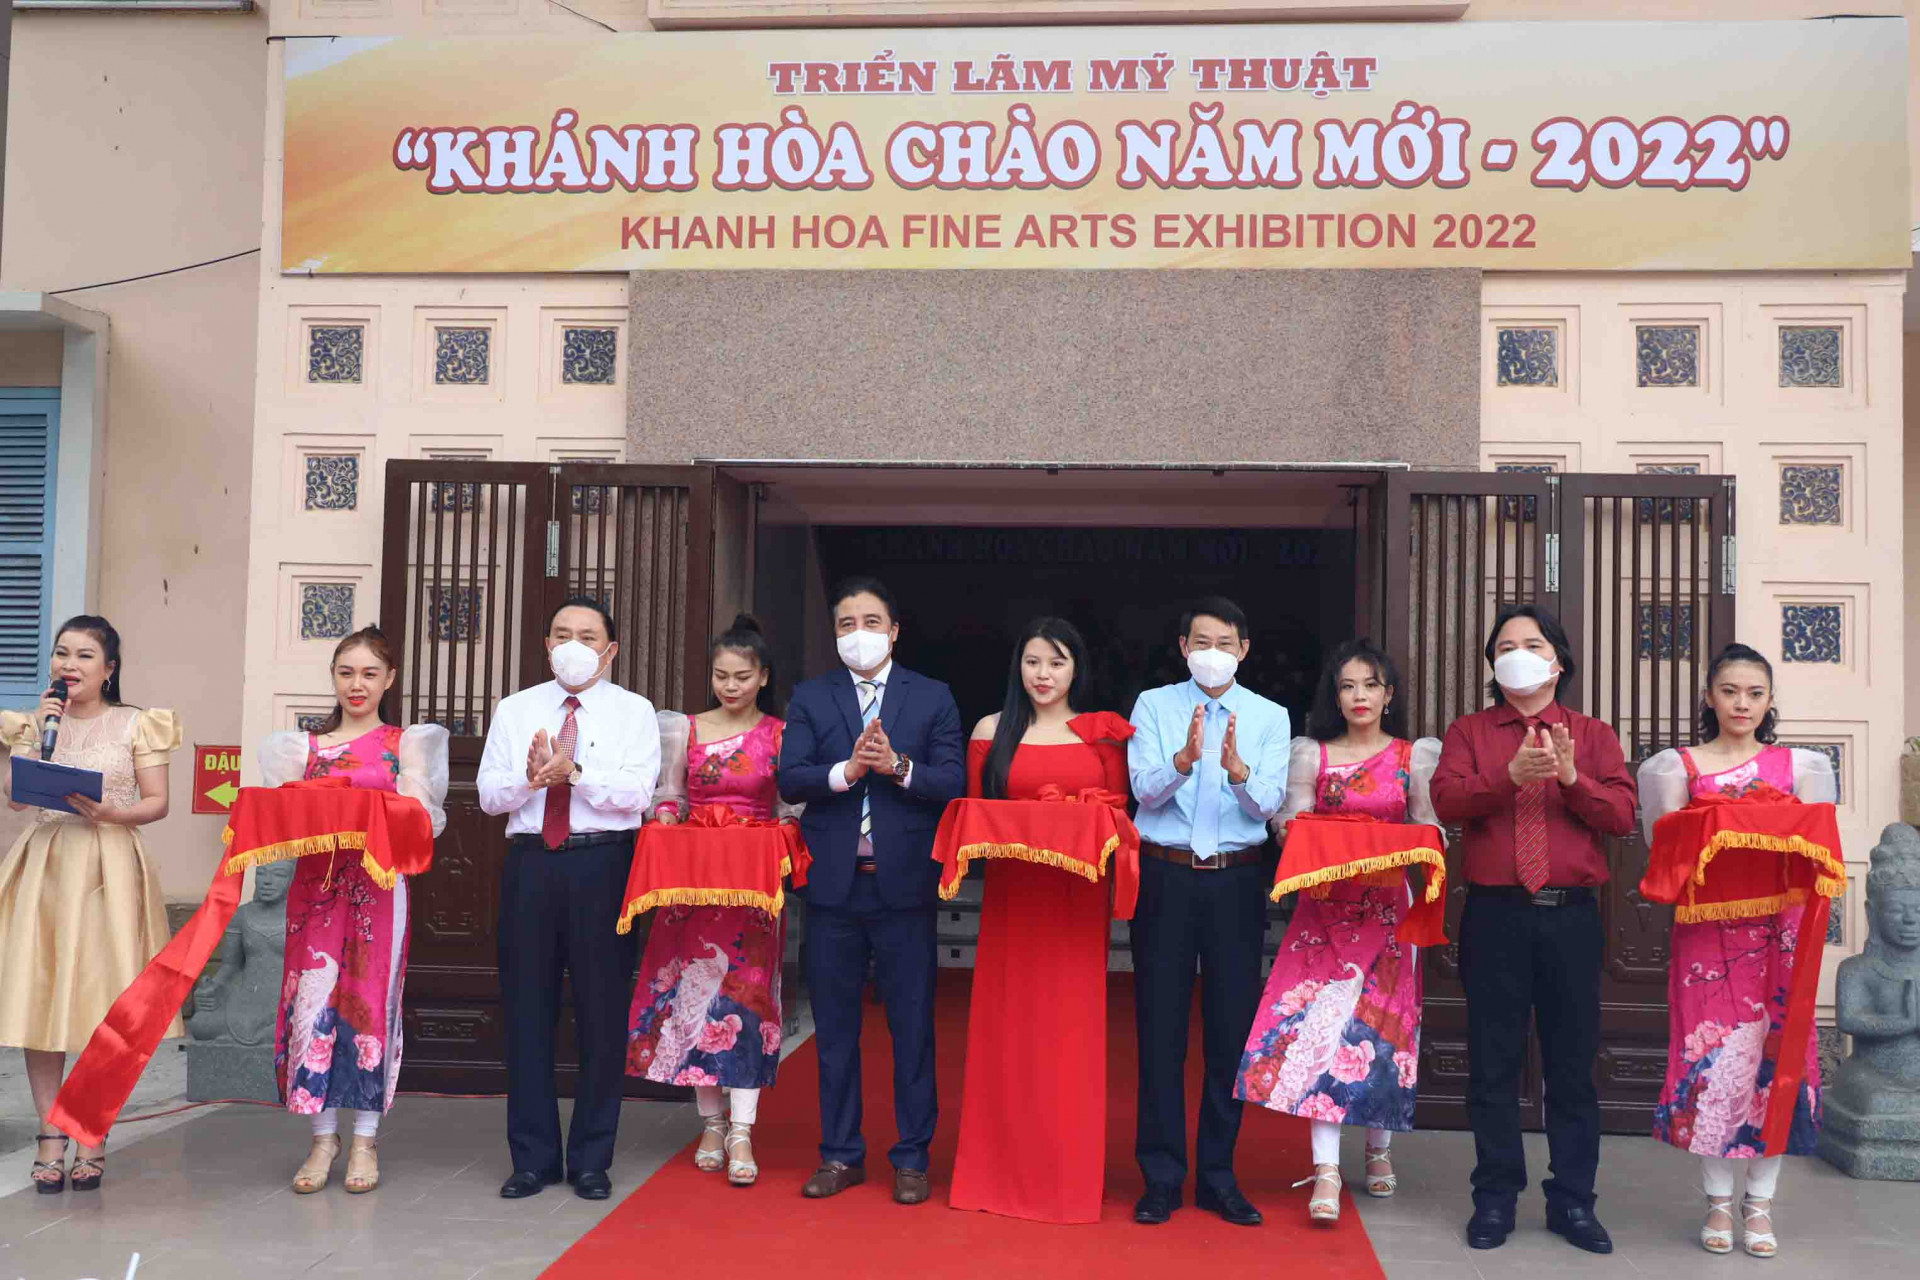 Leadership of Khanh Hoa province and representatives of the organization committee cutting ribbon to open the exhibition